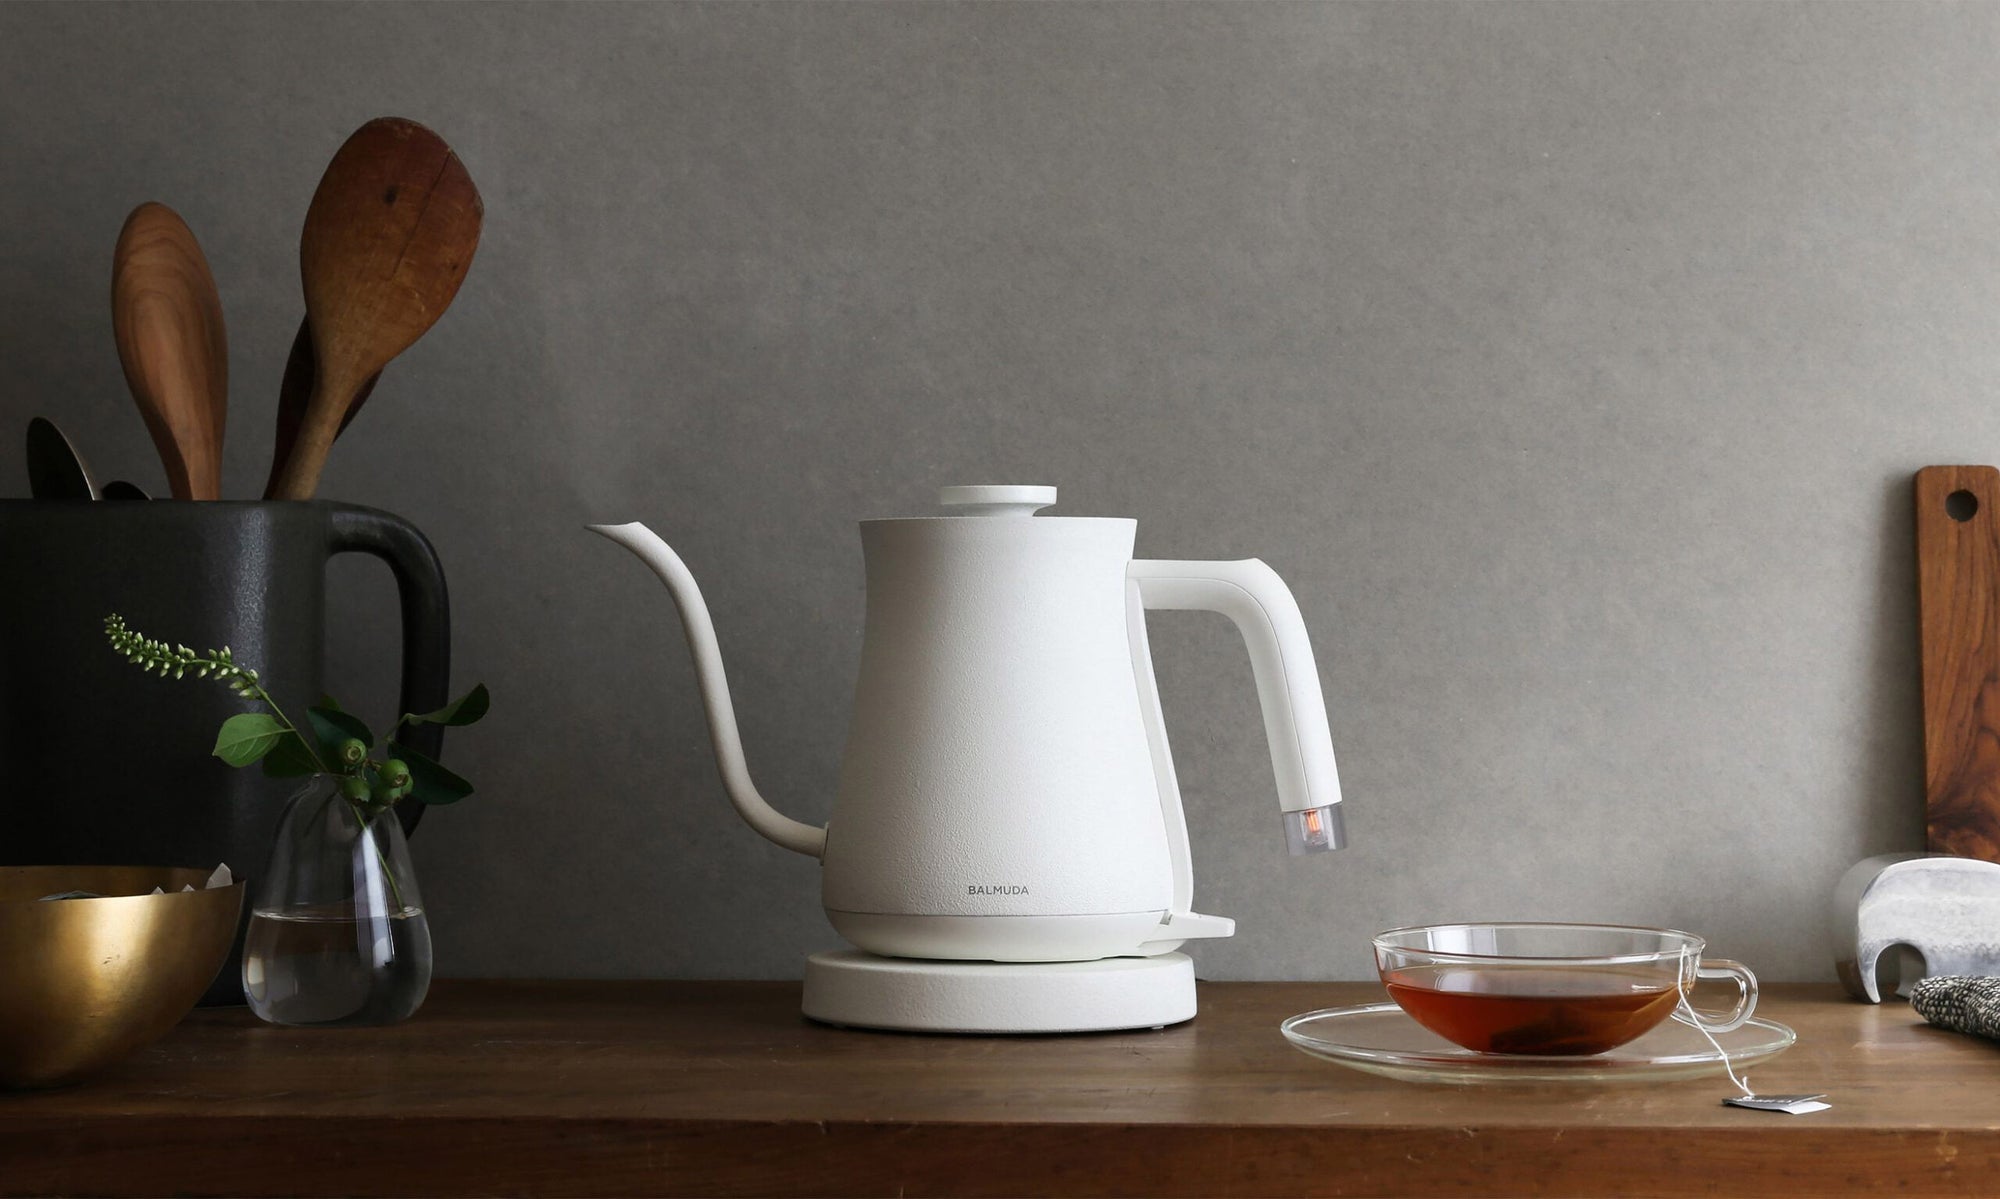 The 5 Best Small Electric Tea Kettle In 2022 Reviews 